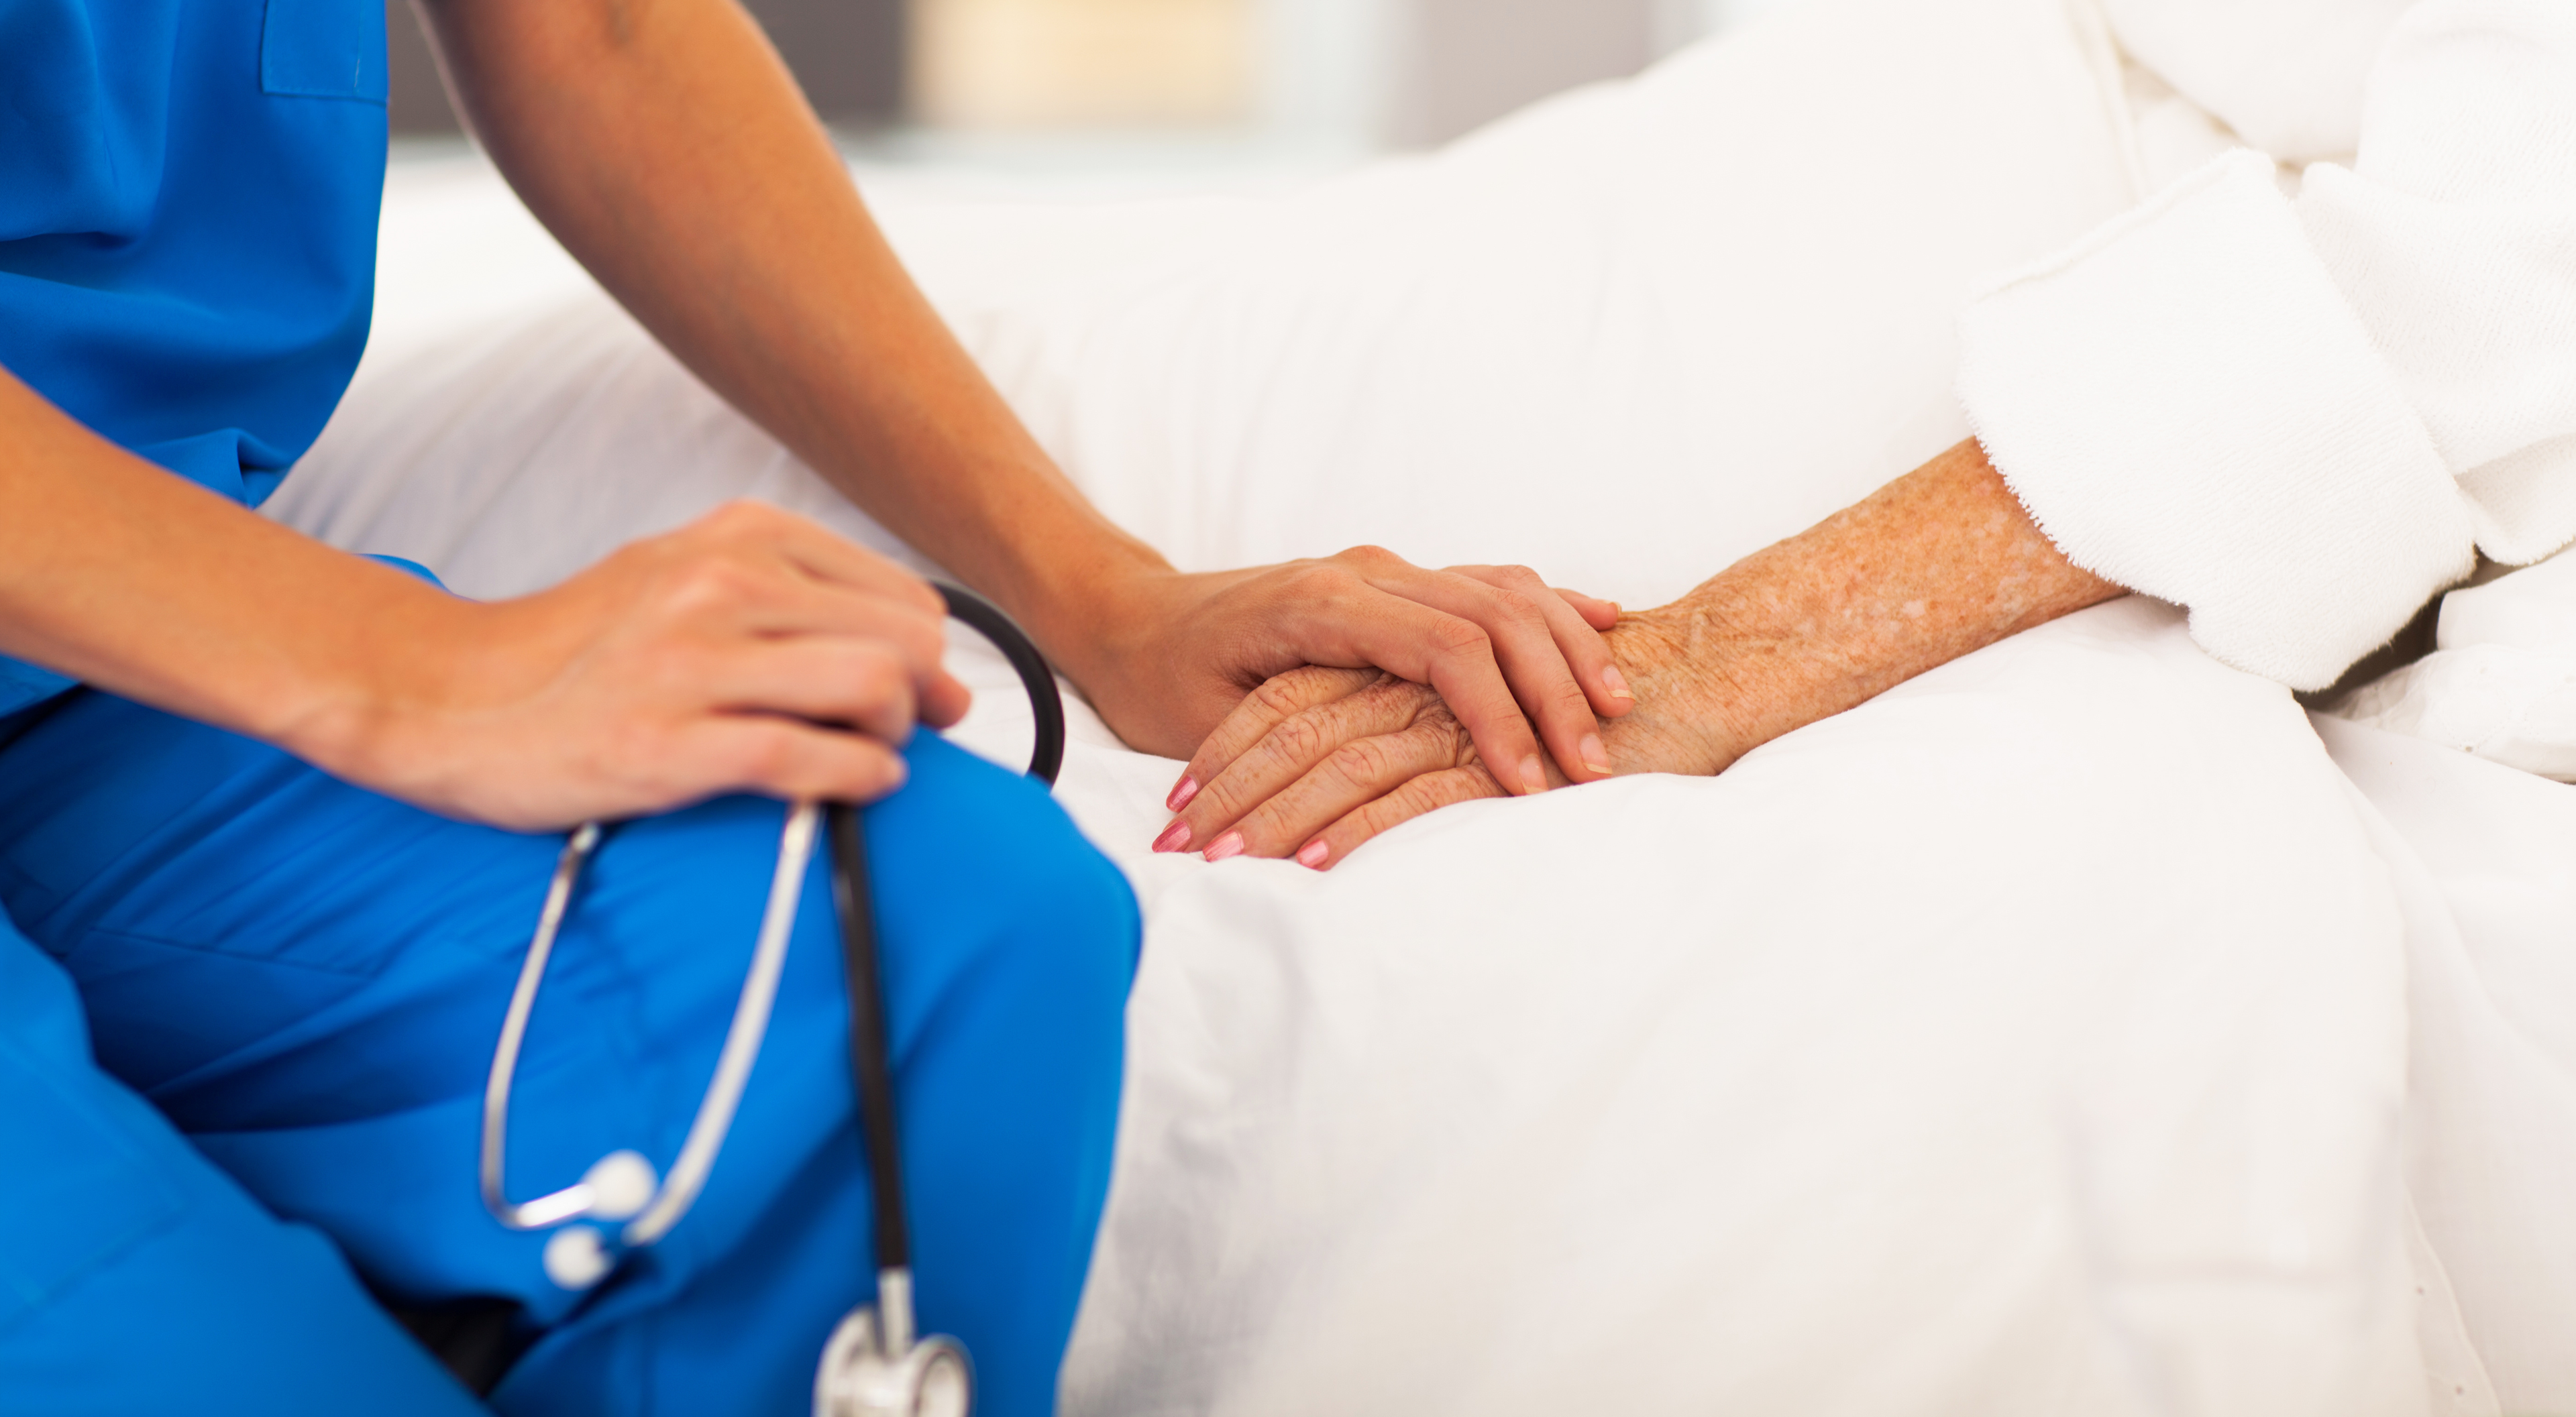 ANA Releases News Survey Findings on Nurse’s Positions on Medical Aid in Dying